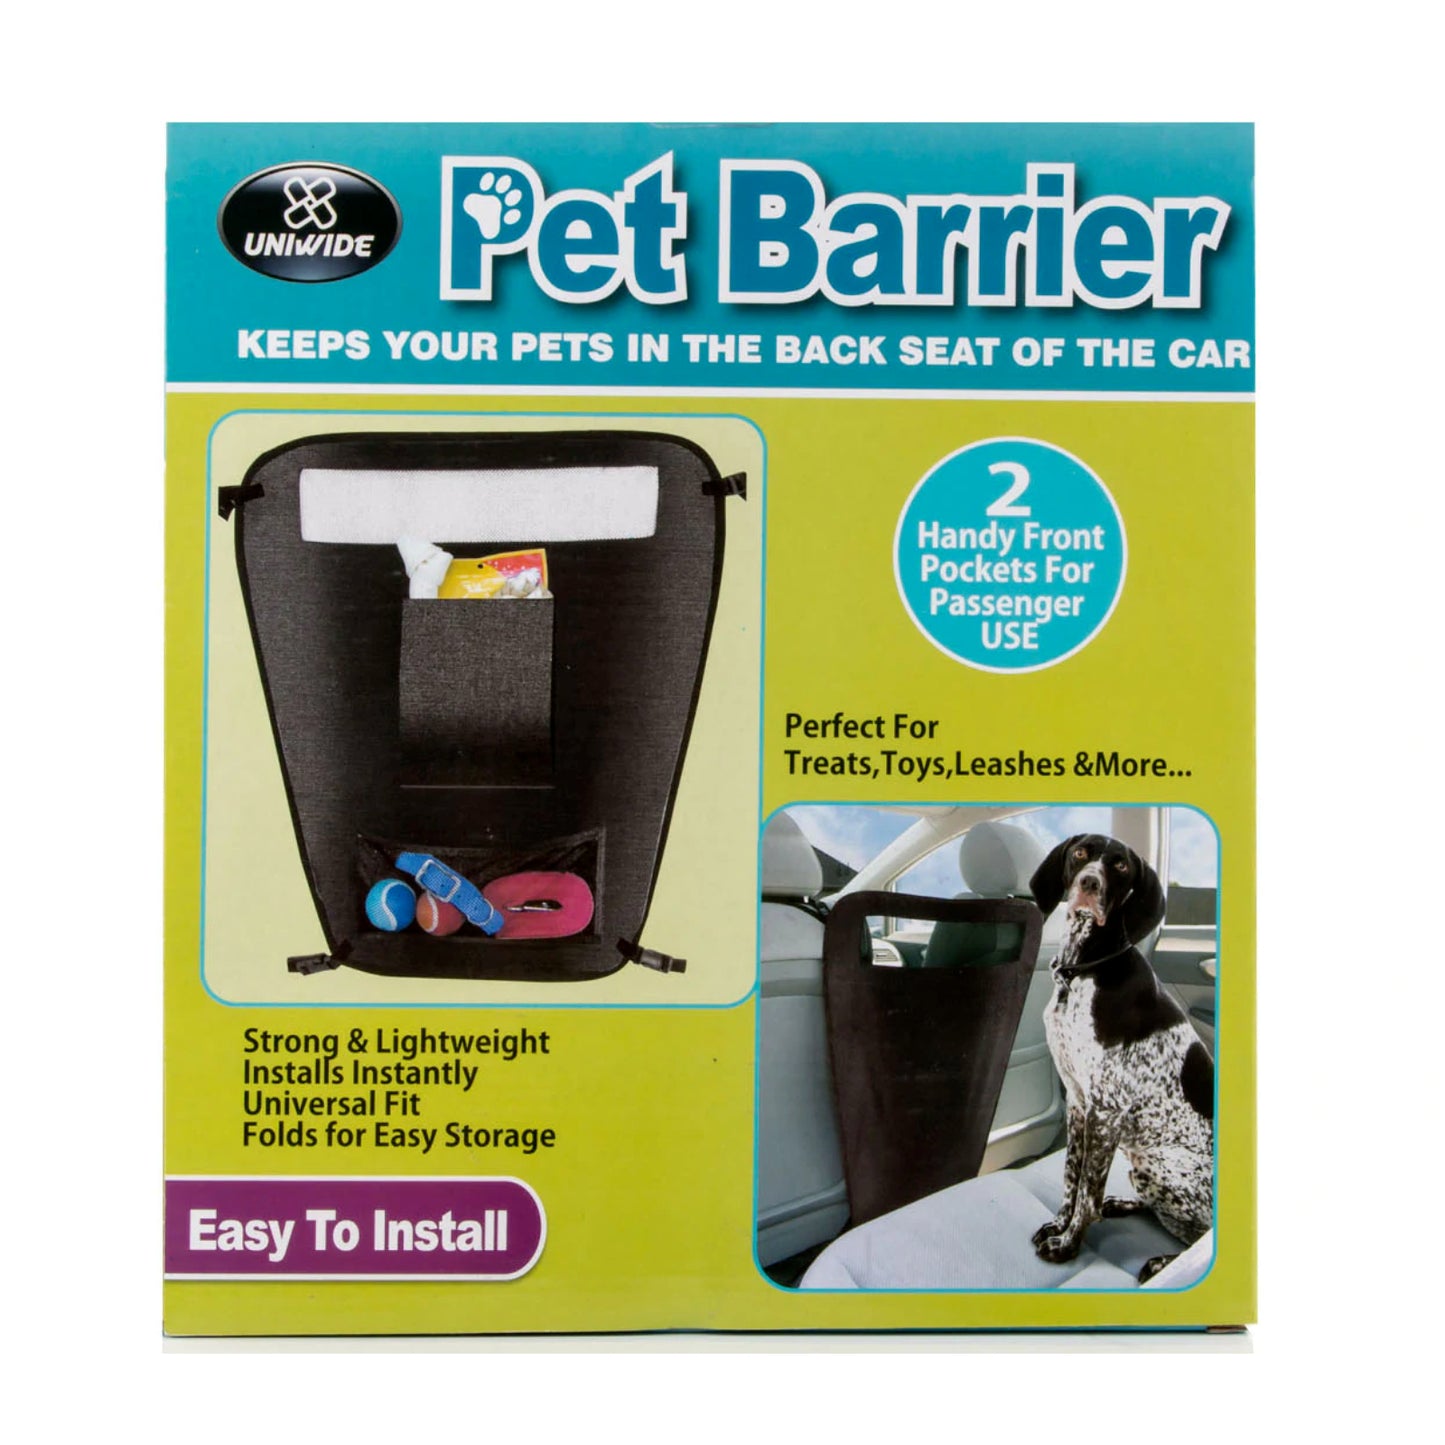 Premium Car Pets Barriers for Safe and Stress-Free Travel for Dogs Dog - Adjustable, Universal Fit, and Easy Installation - Homeware Discounts